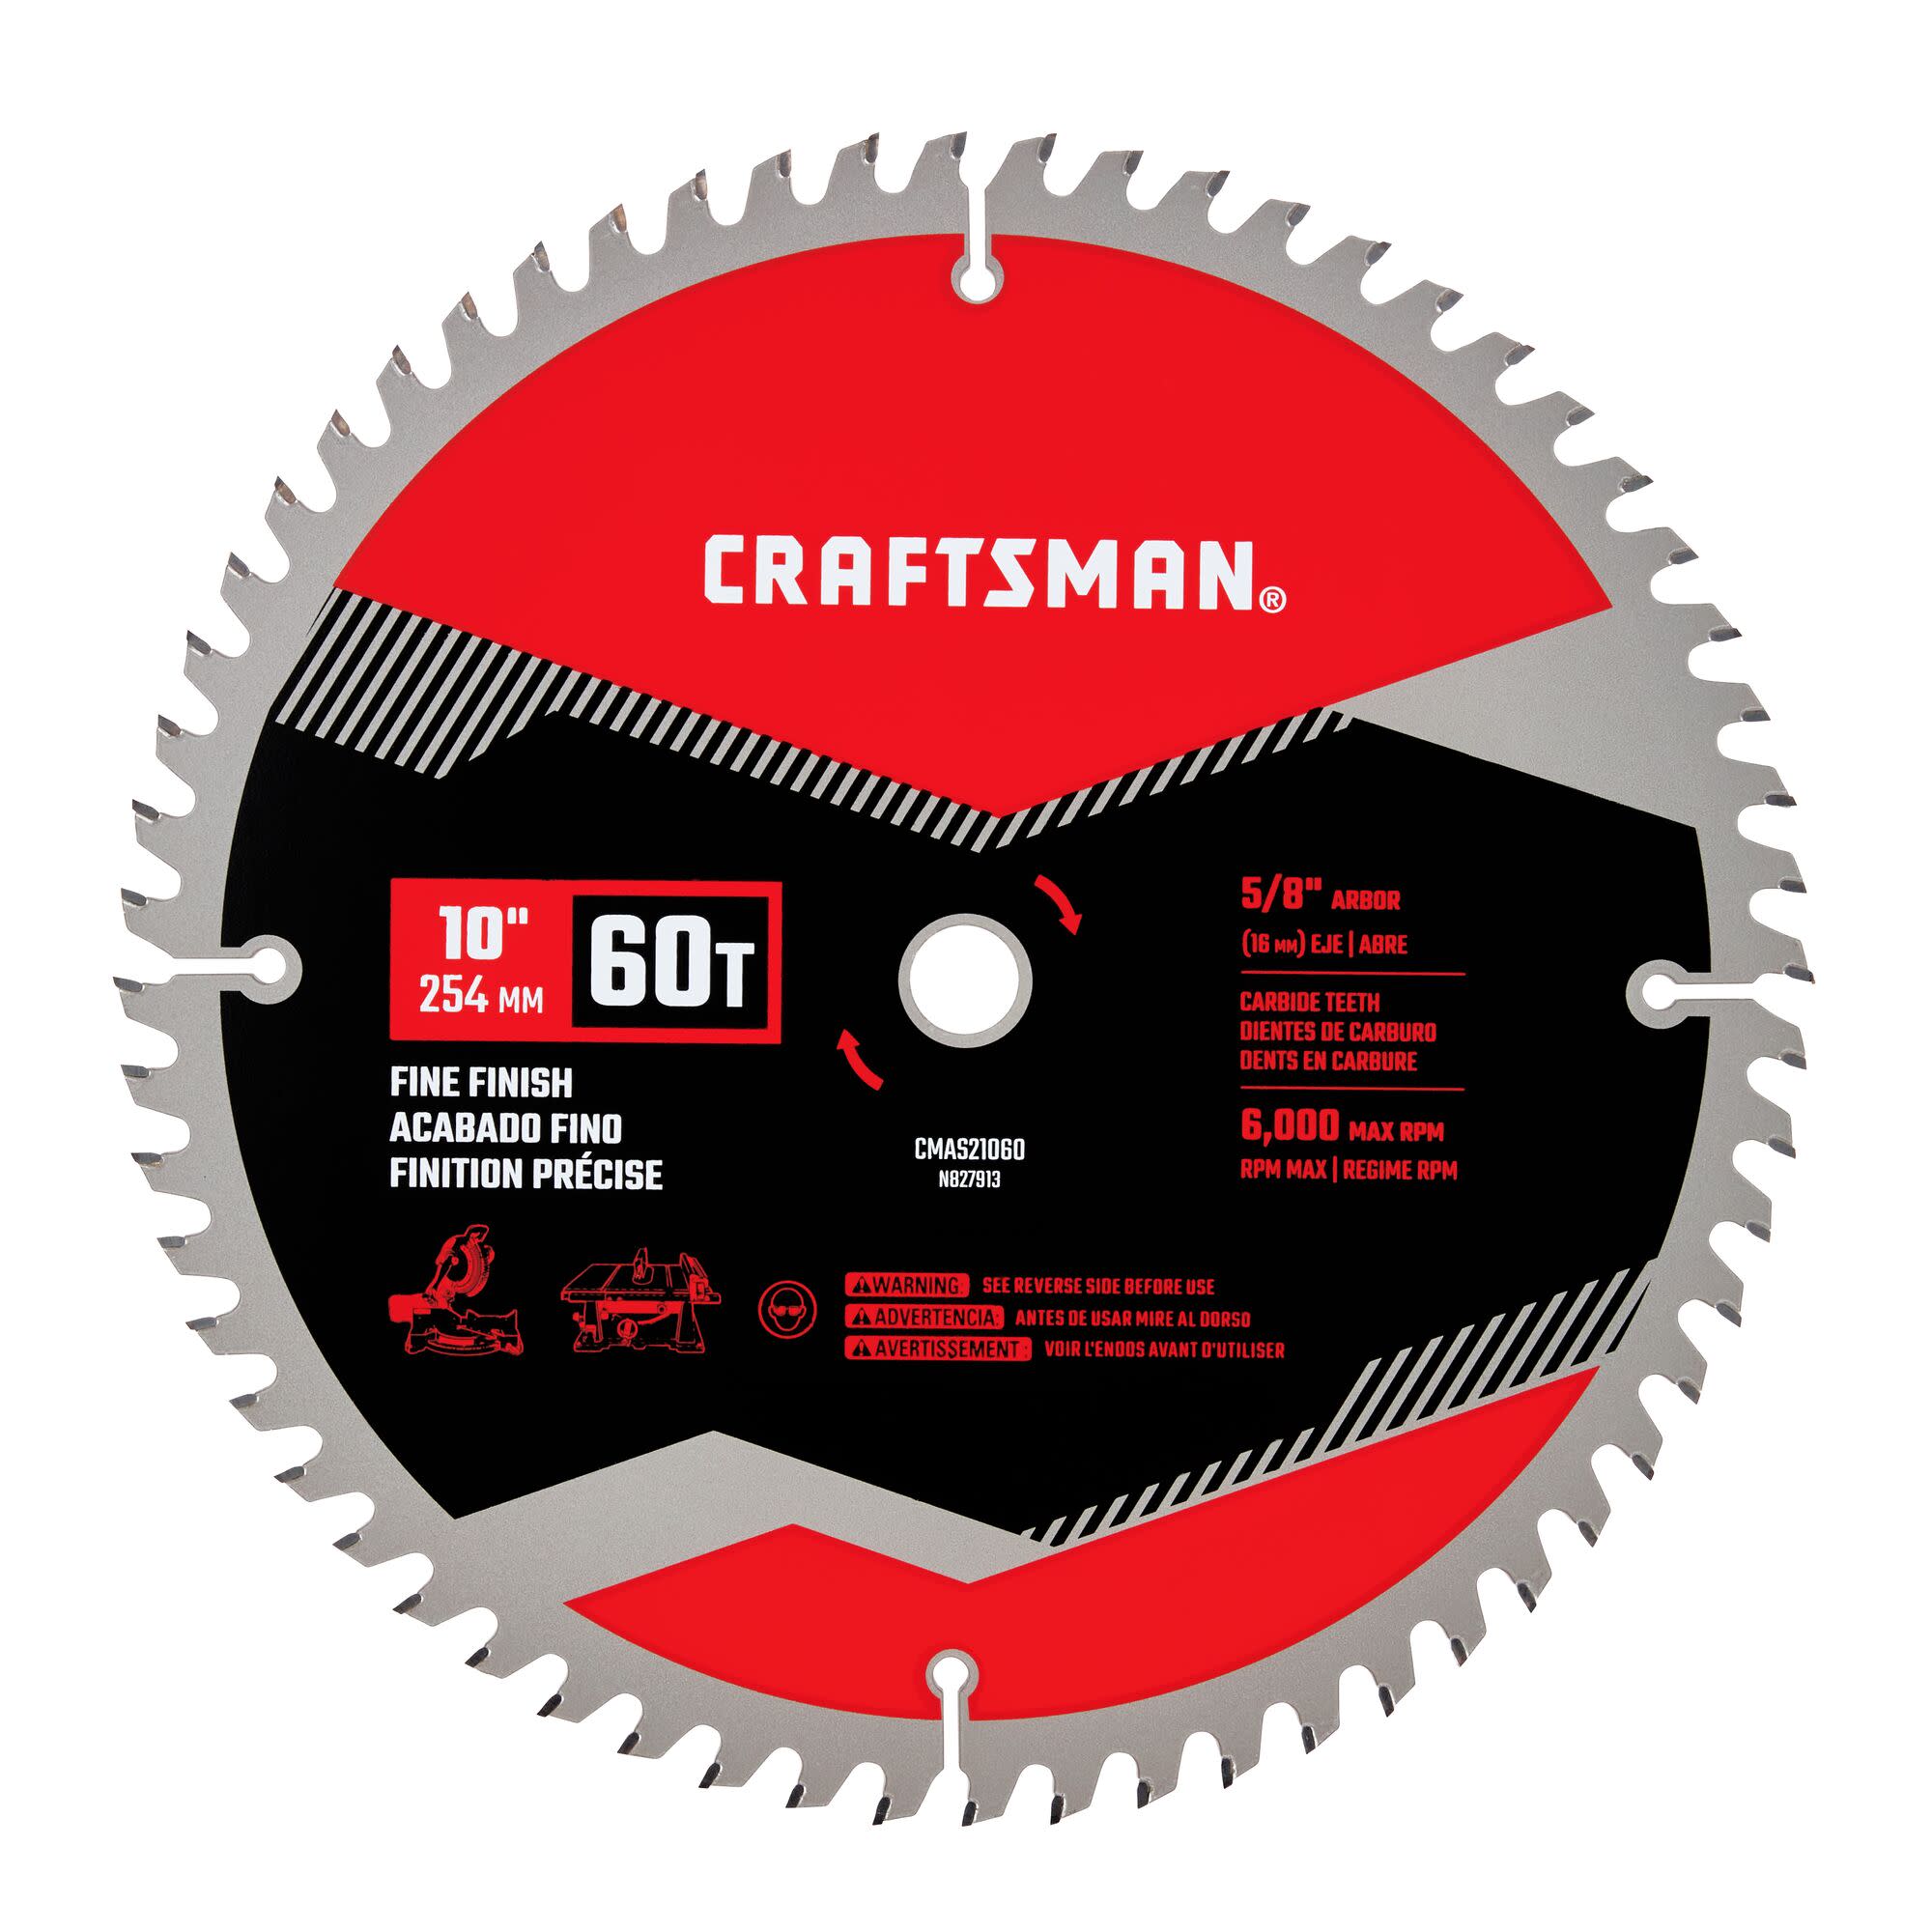 Record Craftsman cicular saw blade RM 1651 Tungsten carbide tipped 6.5 inch 